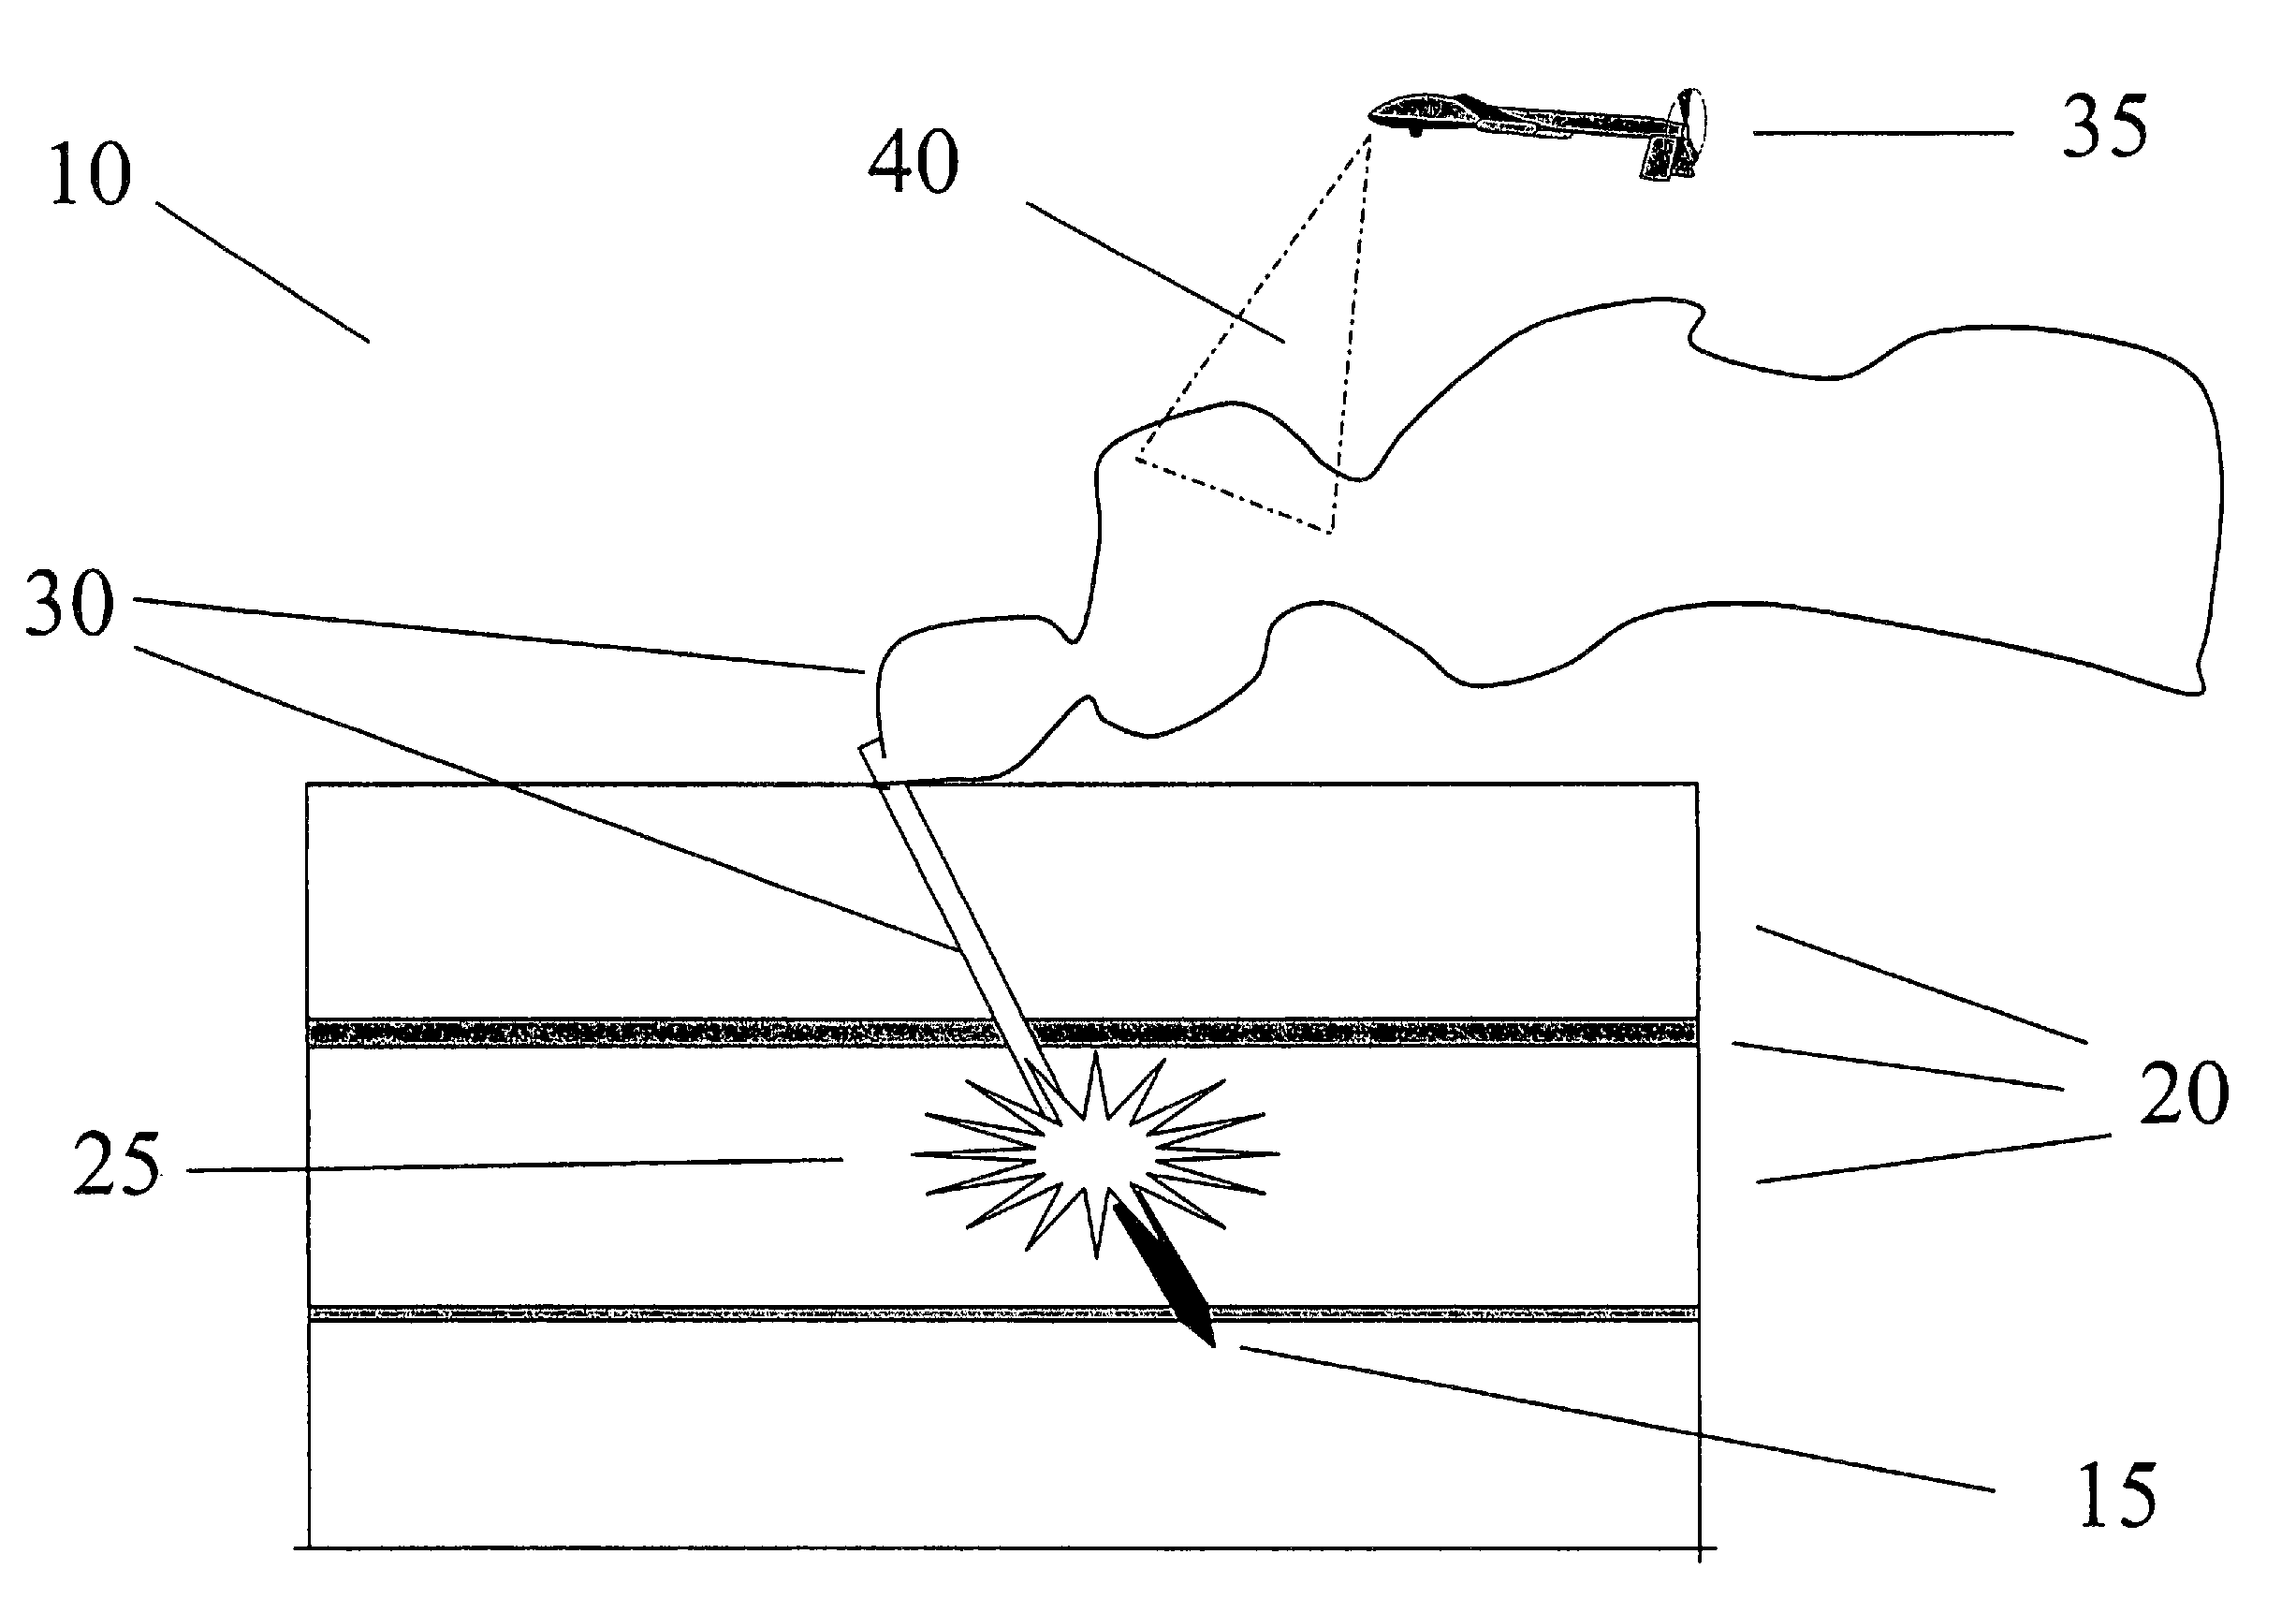 Method and system for detection using nanodot taggants